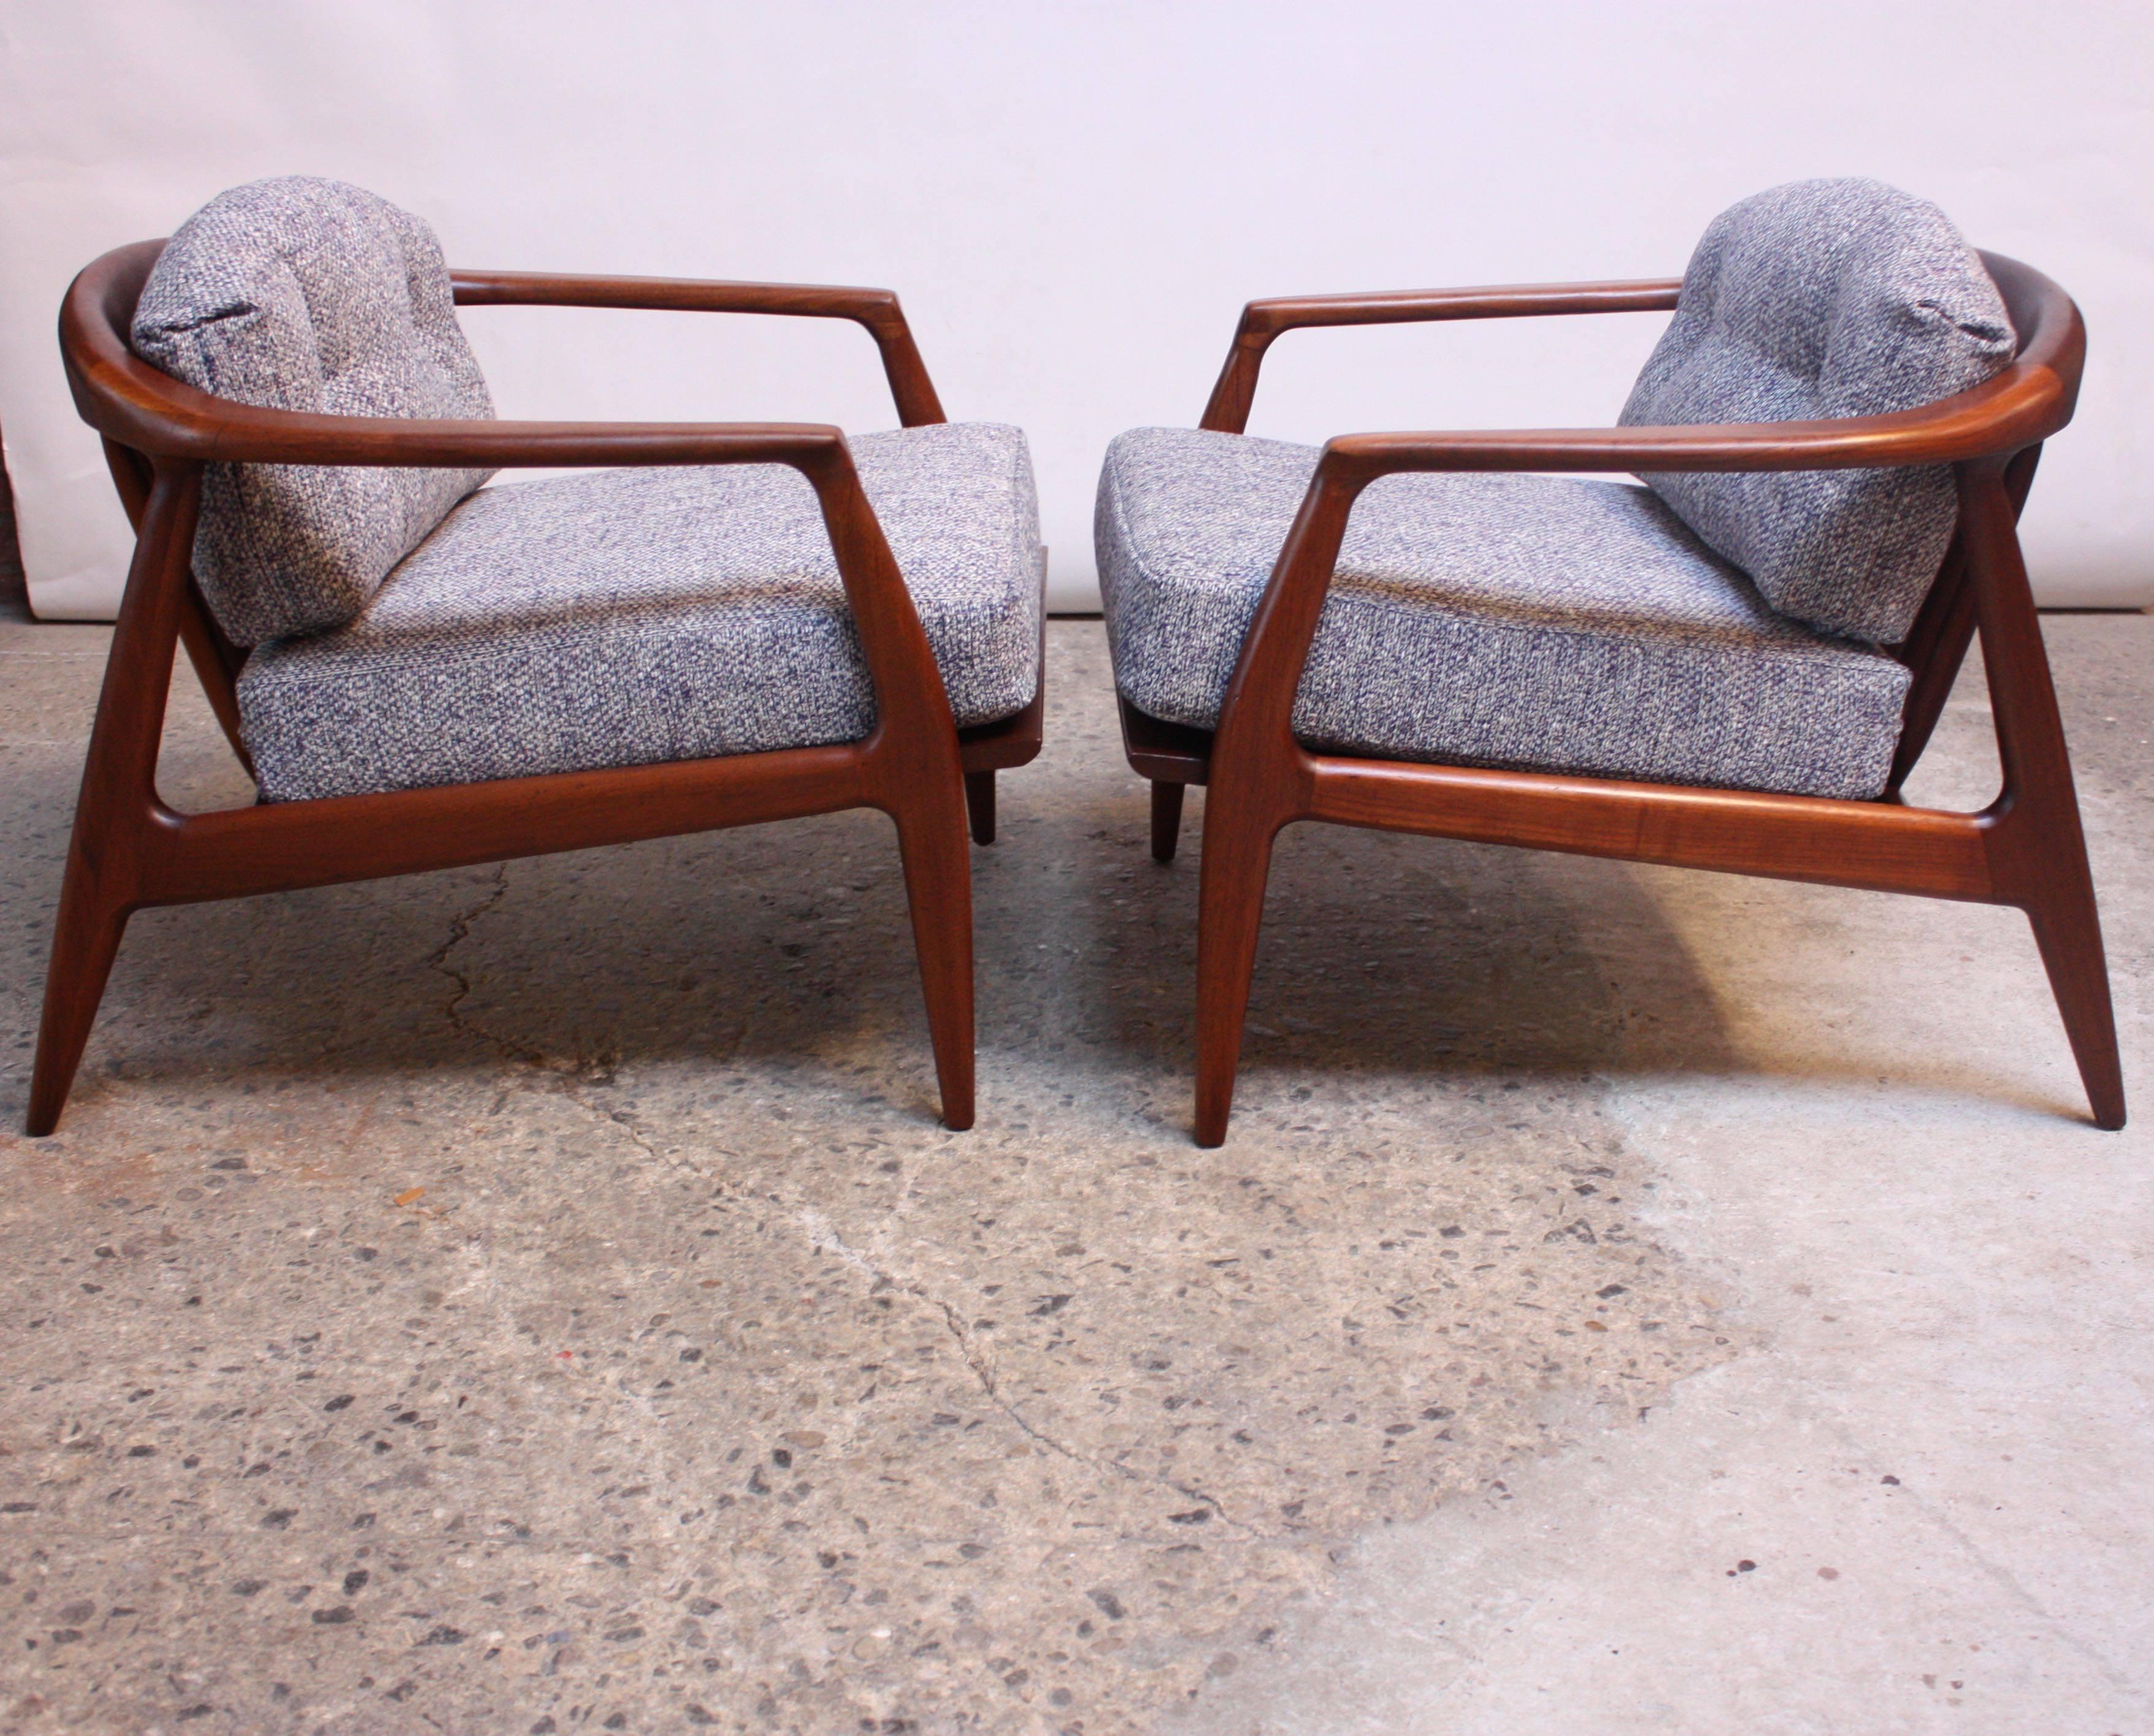 These Milo Baughman armchairs feature dramatic, clean lines. The exaggerated, slanted legs are nicely contrasted by a curved back with simple slat supports.
Thayer Coggin fabric tag is intact on one chair.
The fabric is a tweed and the low back